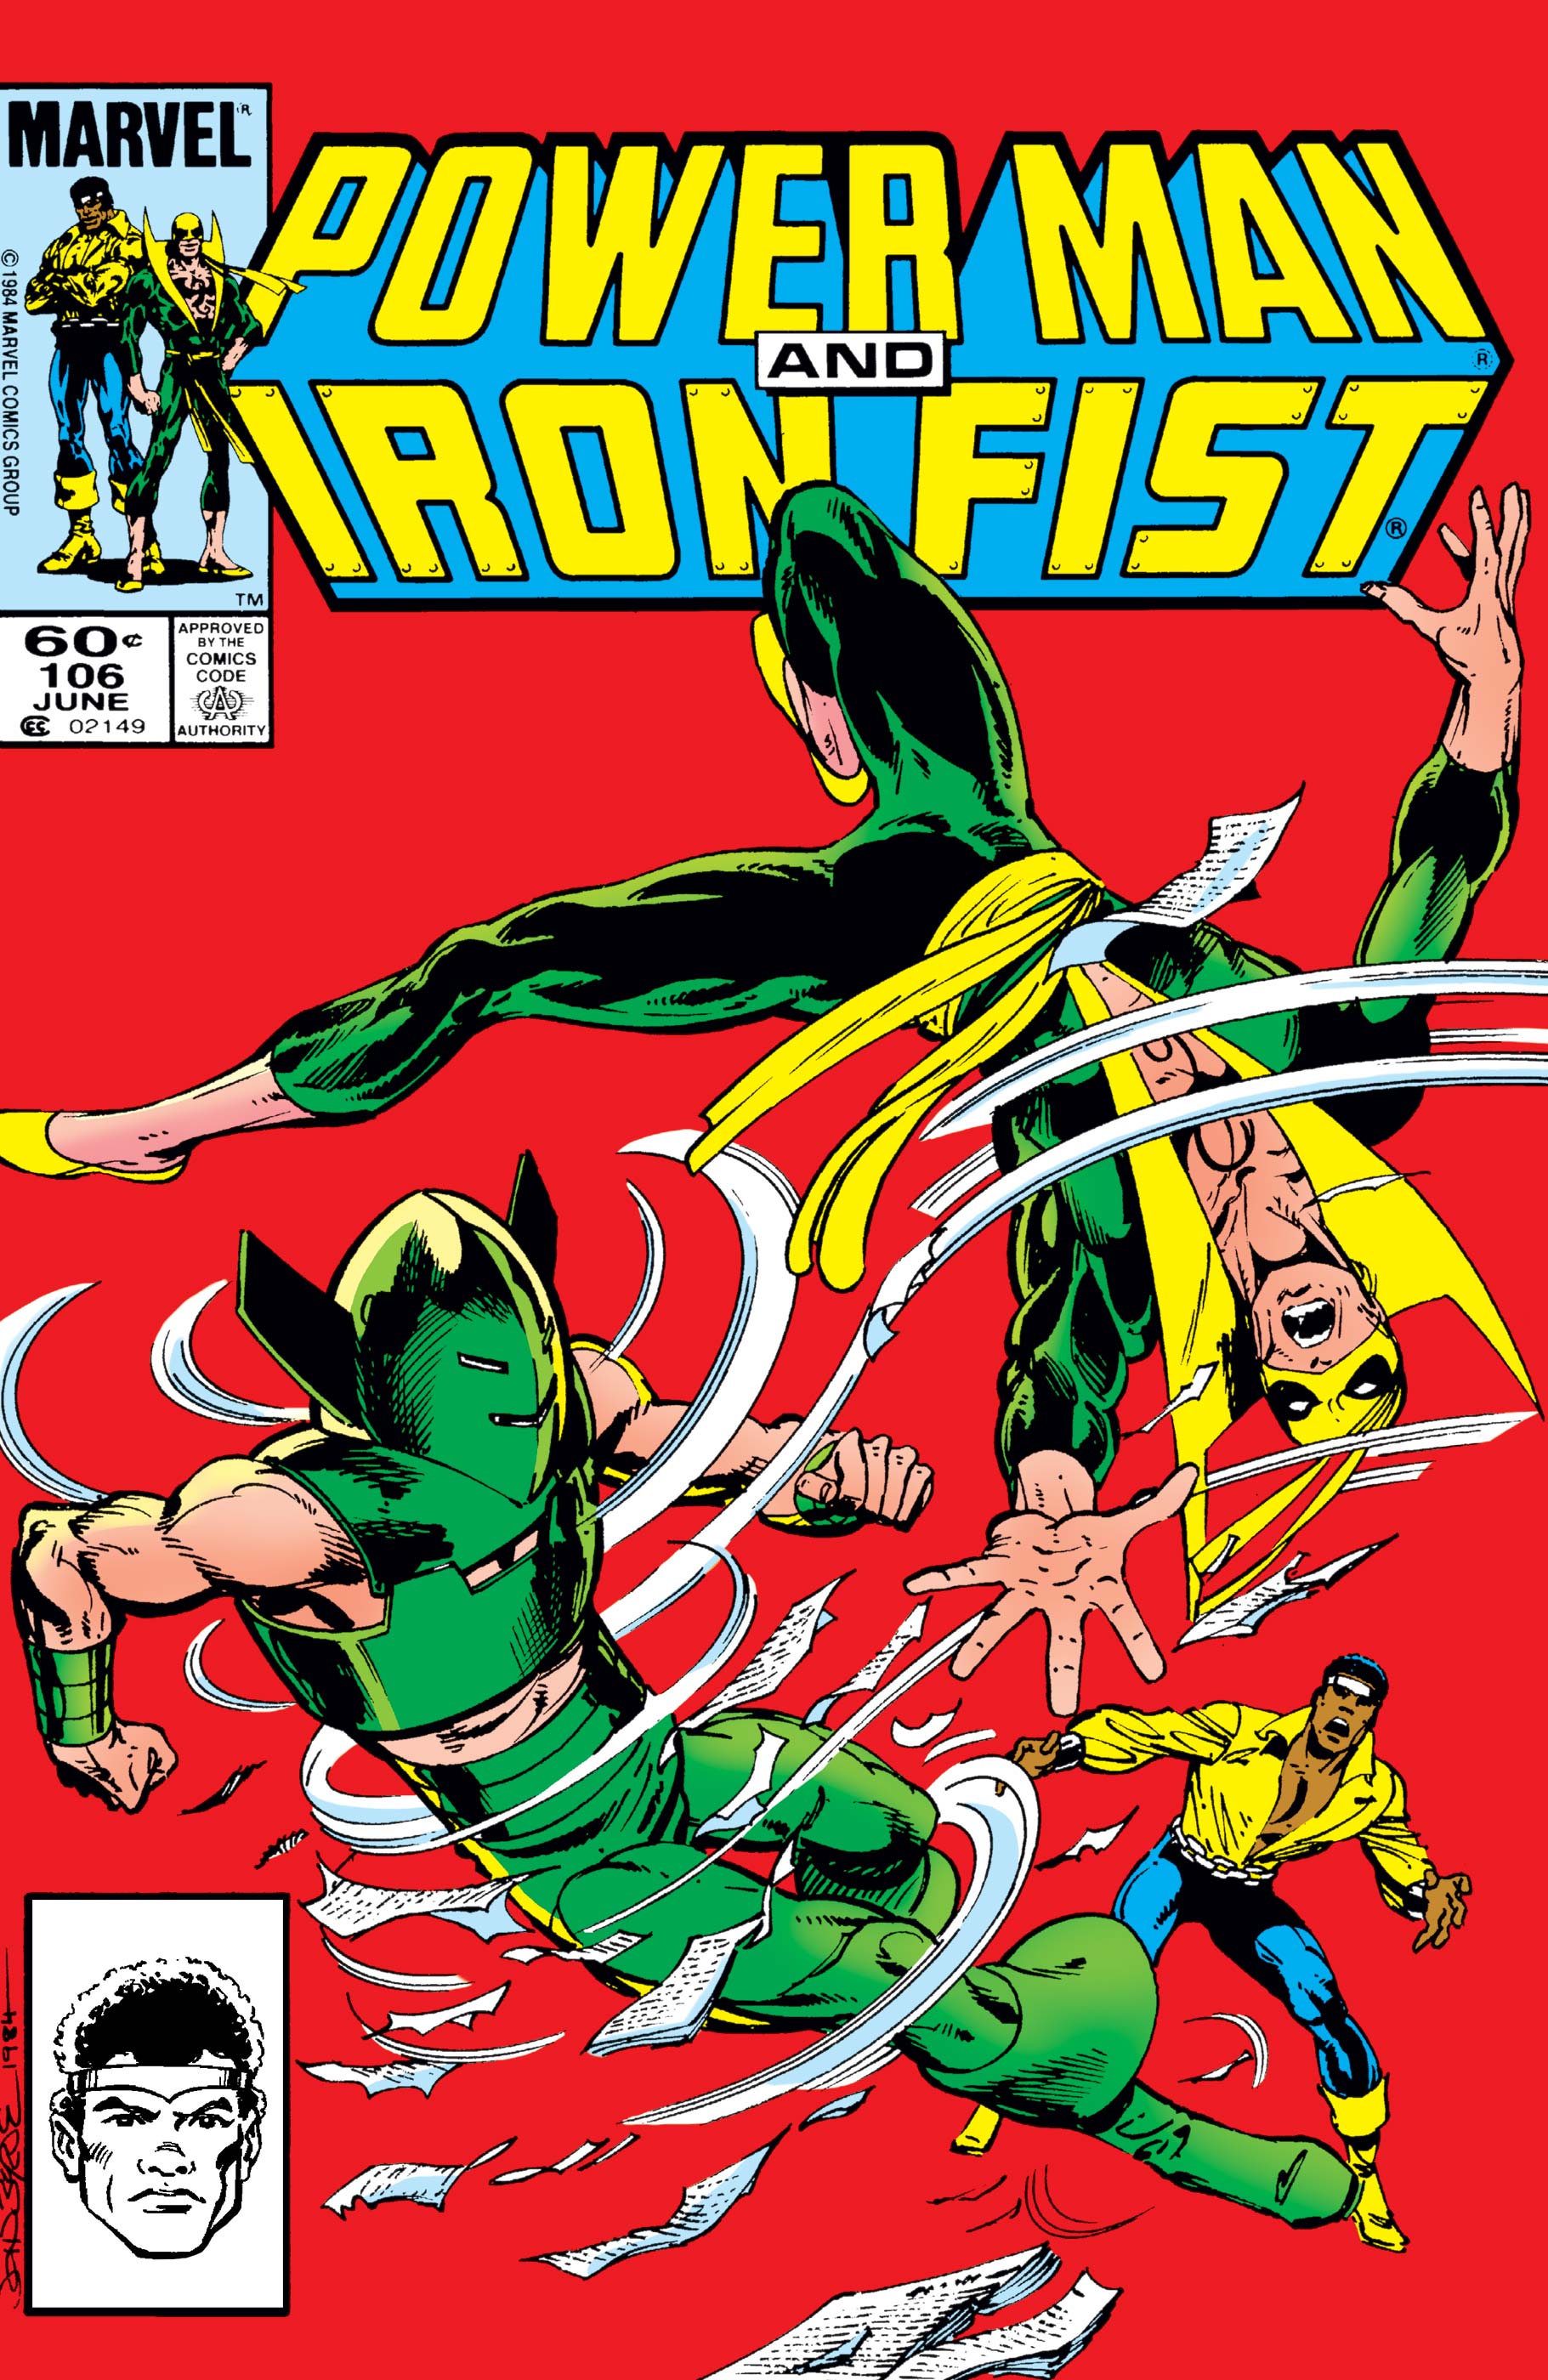 Power Man and Iron Fist (1978) #106